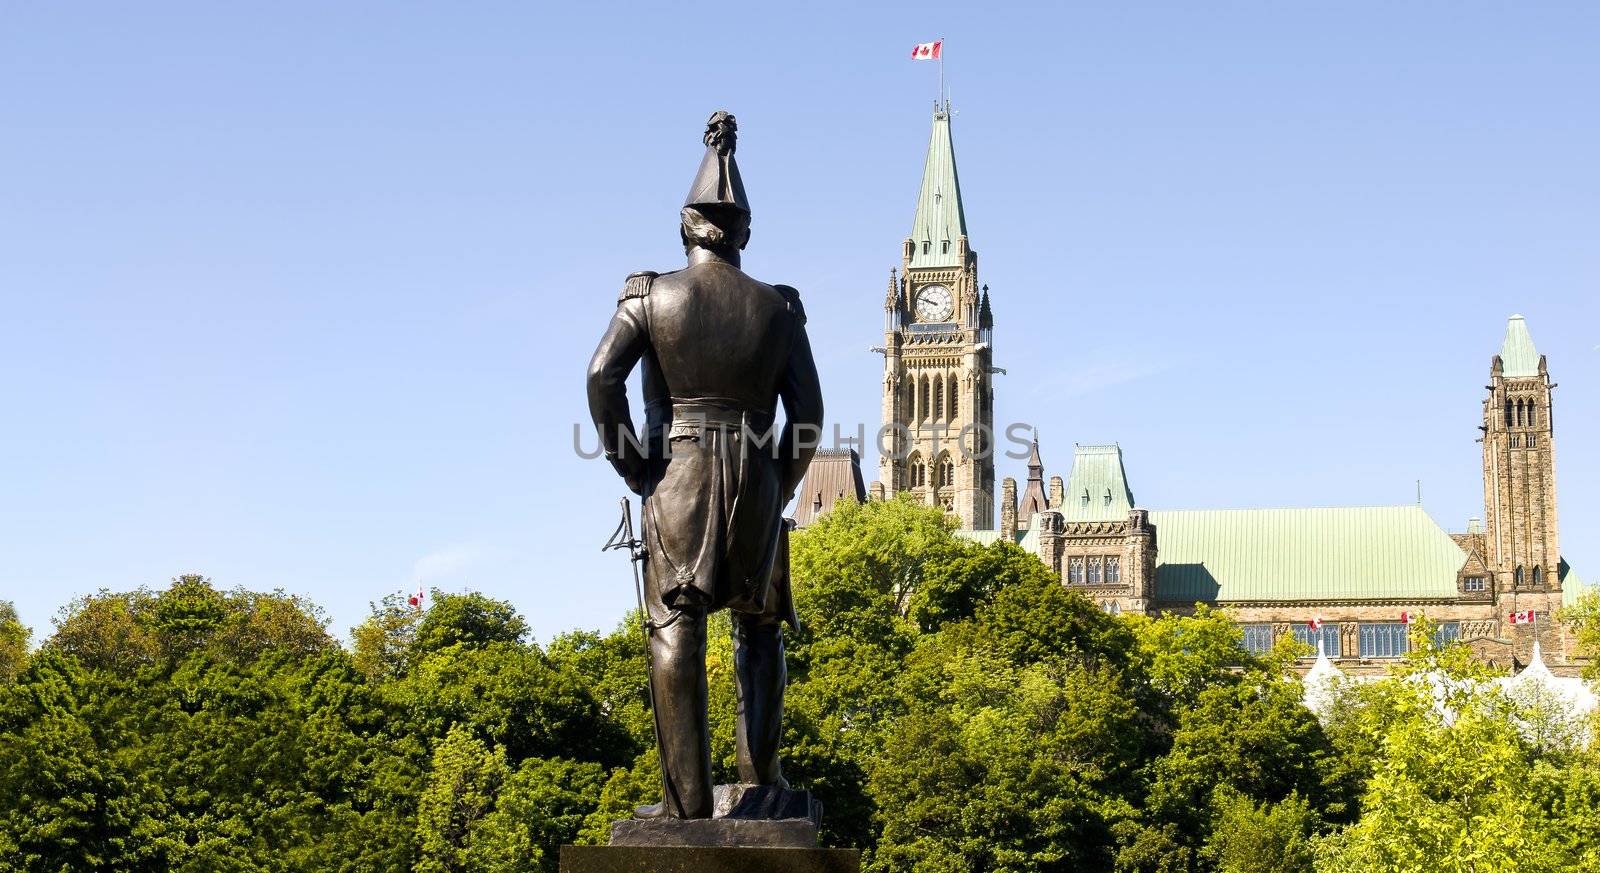 A statue of Colonel By created by Joseph-Émile Brunet stands in nearby Major's Hill Park, across from Parliament Hill in Ottawa, Canada.